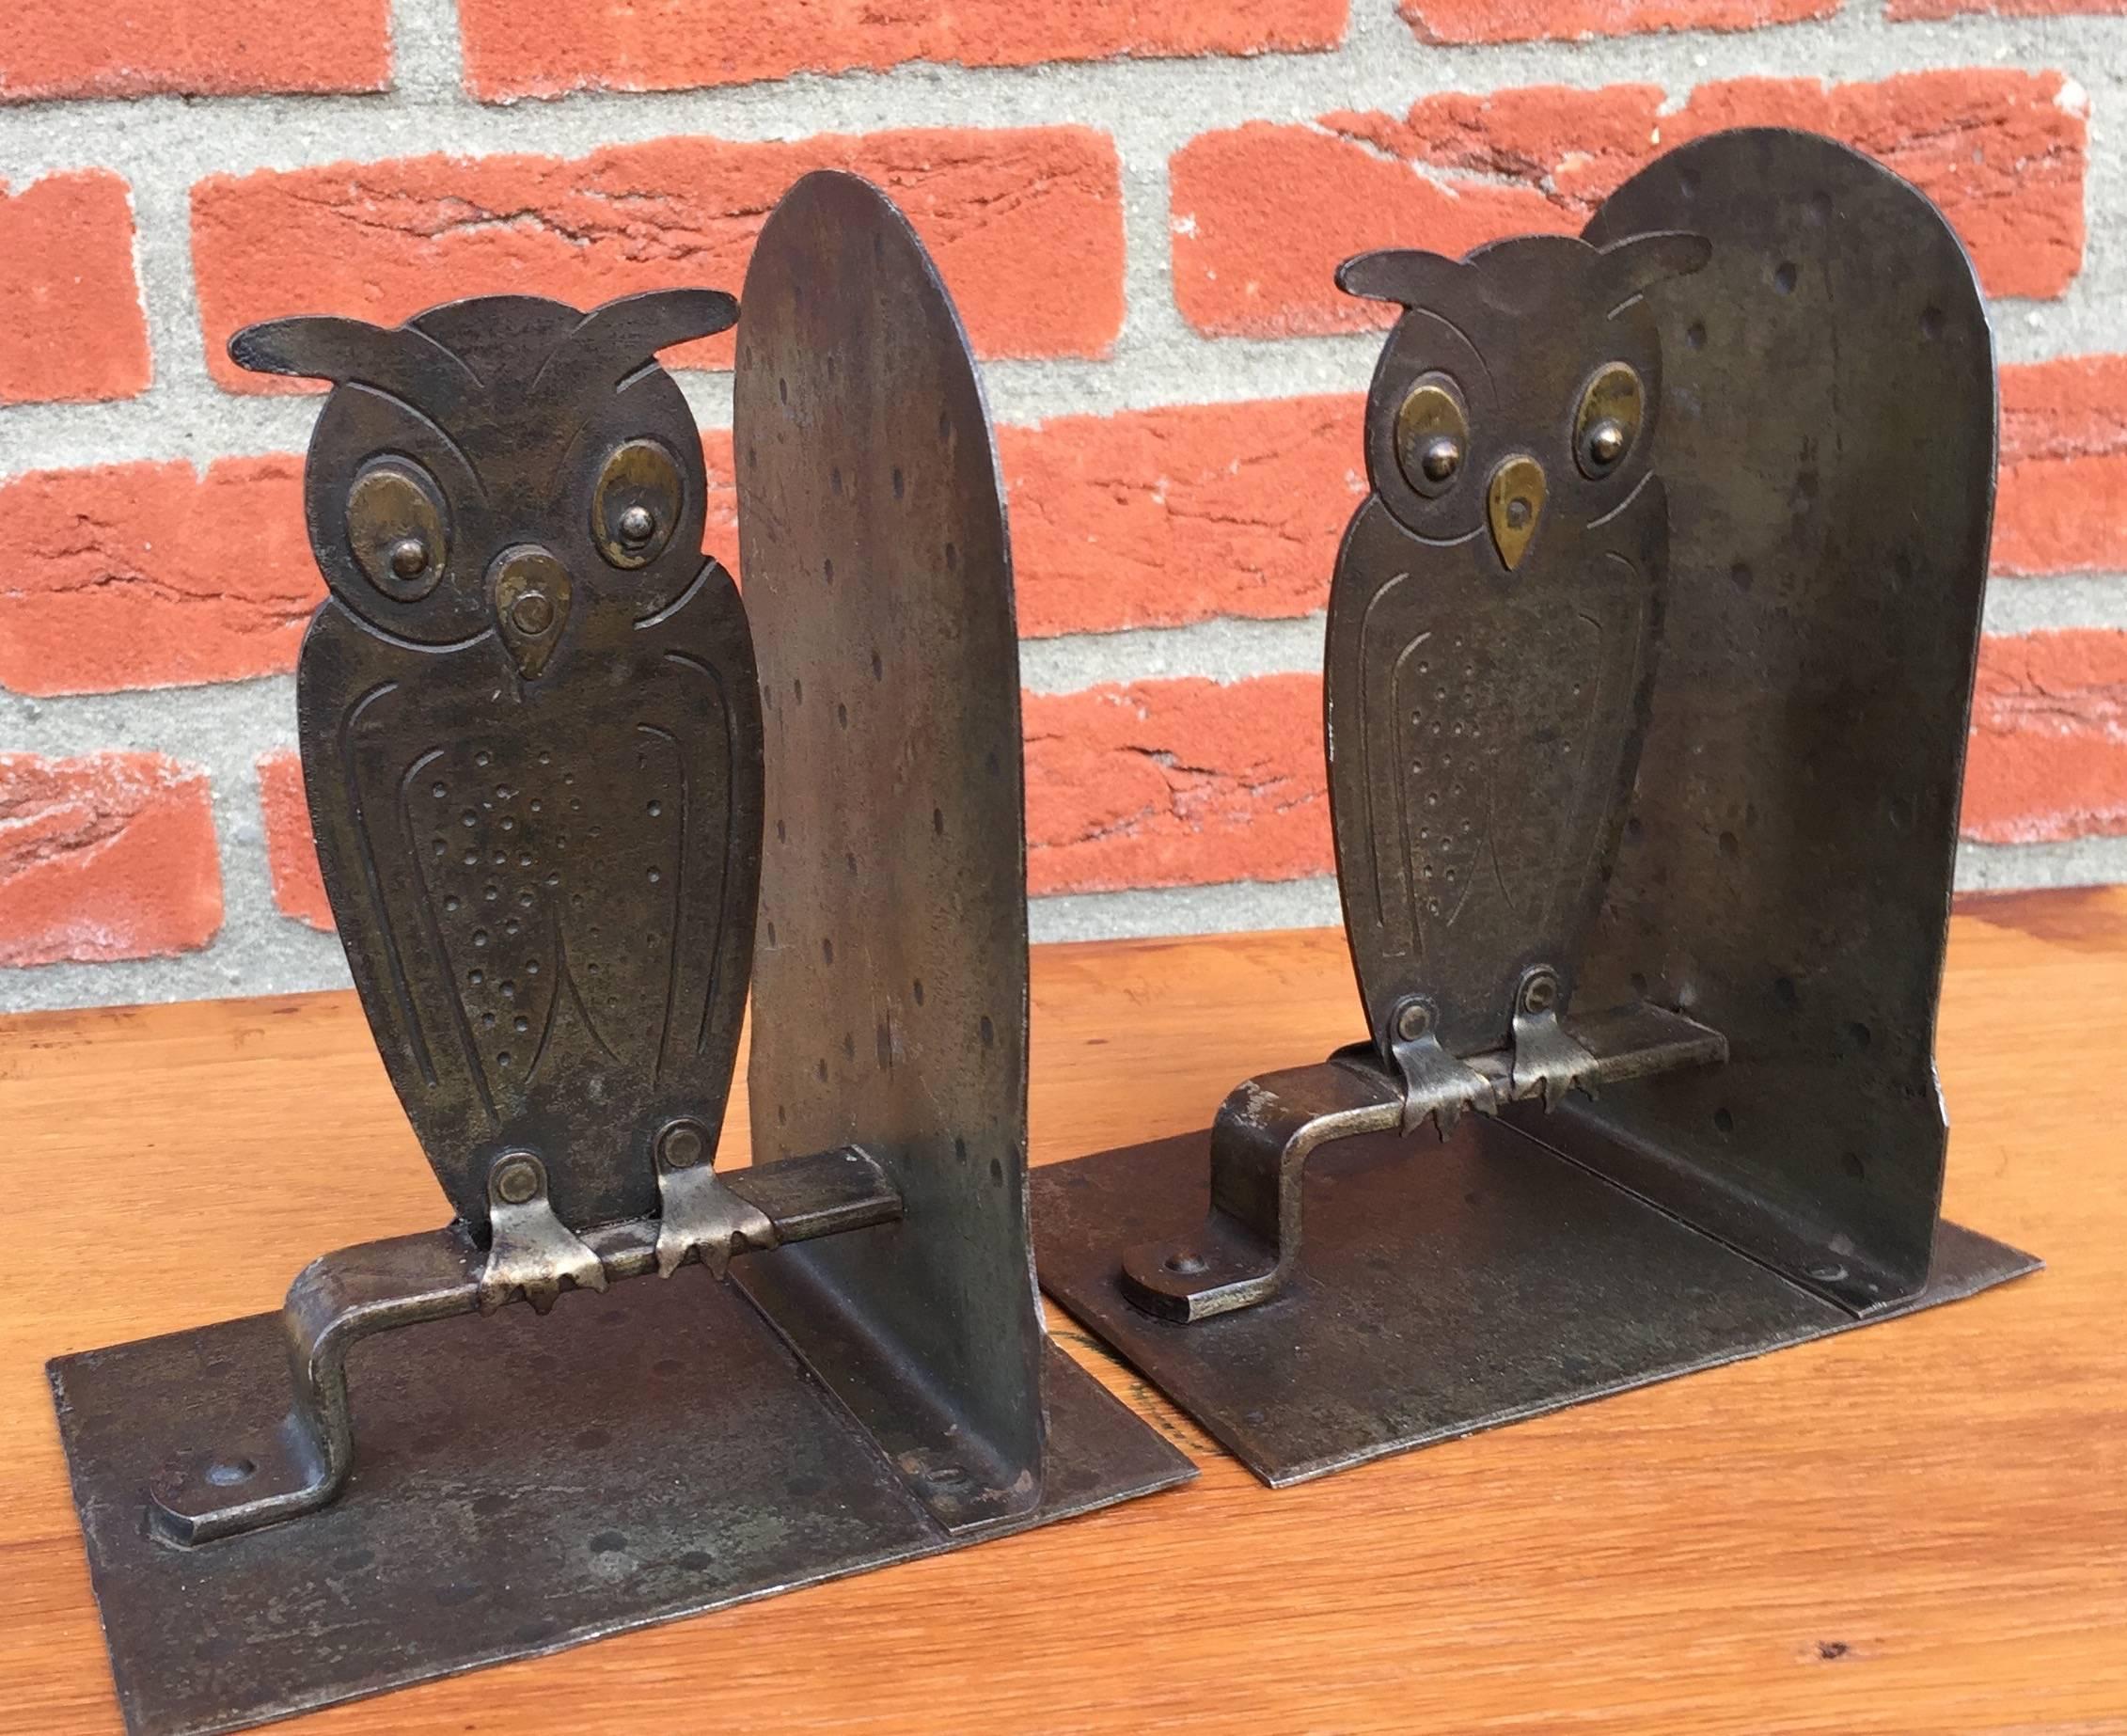 20th Century Vintage Pair of Hammered Metal Owl Bookends by Goberg, Hugo Berger, Germany